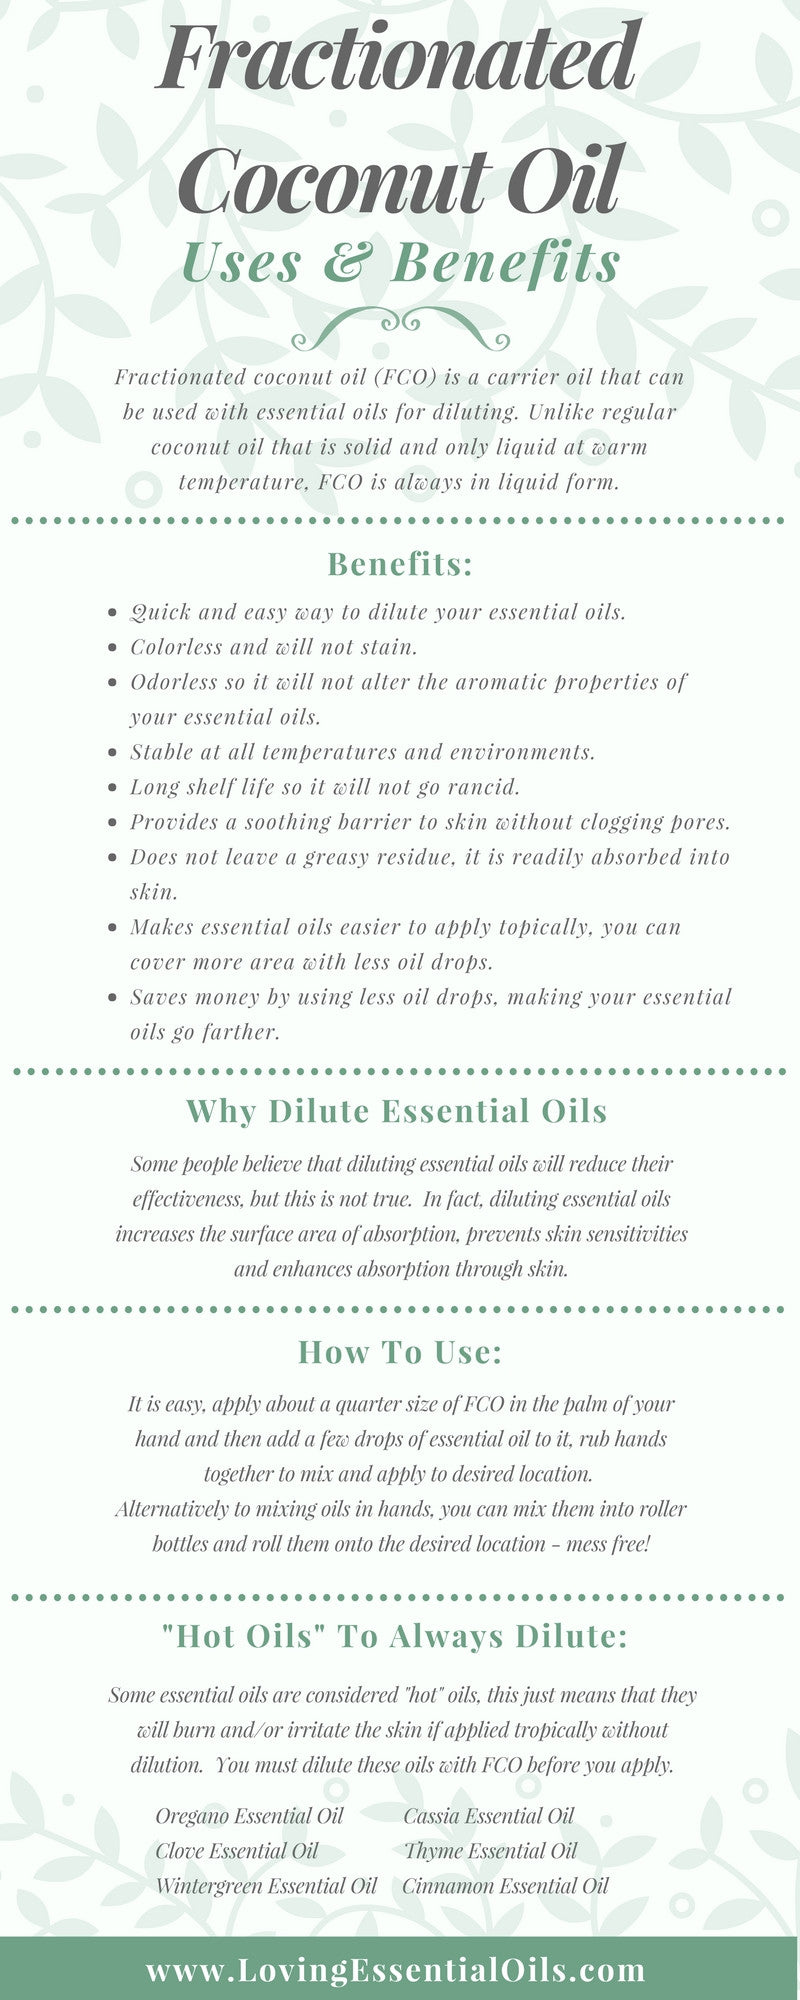 Fractionated Coconut Oil Benefits and Uses Infographic by Loving Essential Oils